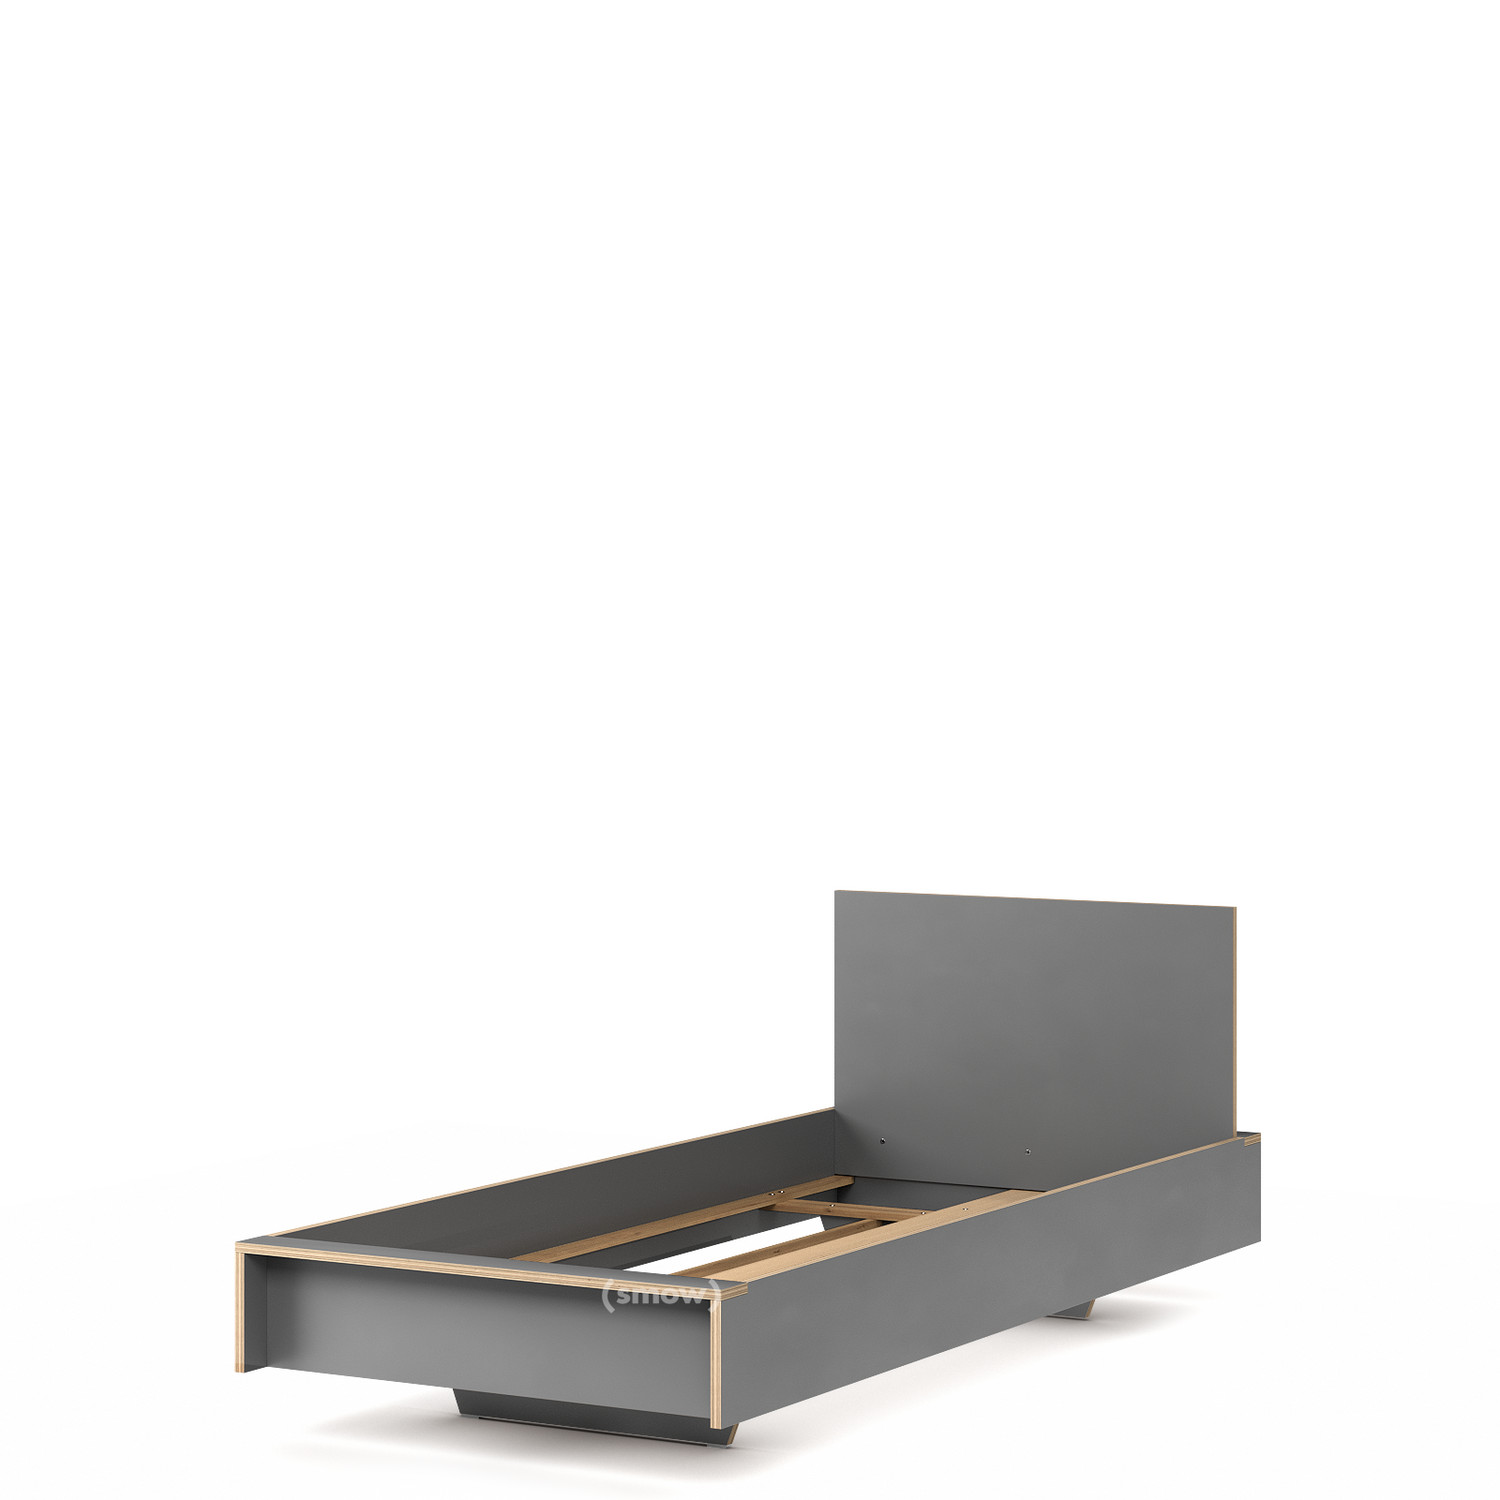 Door pindas rit Müller Small Living Flai Bed, 90 x 200, With headboard, CPL anthracite,  Without slatted frame by Kaschkasch, 2015 - Designer furniture by smow.com